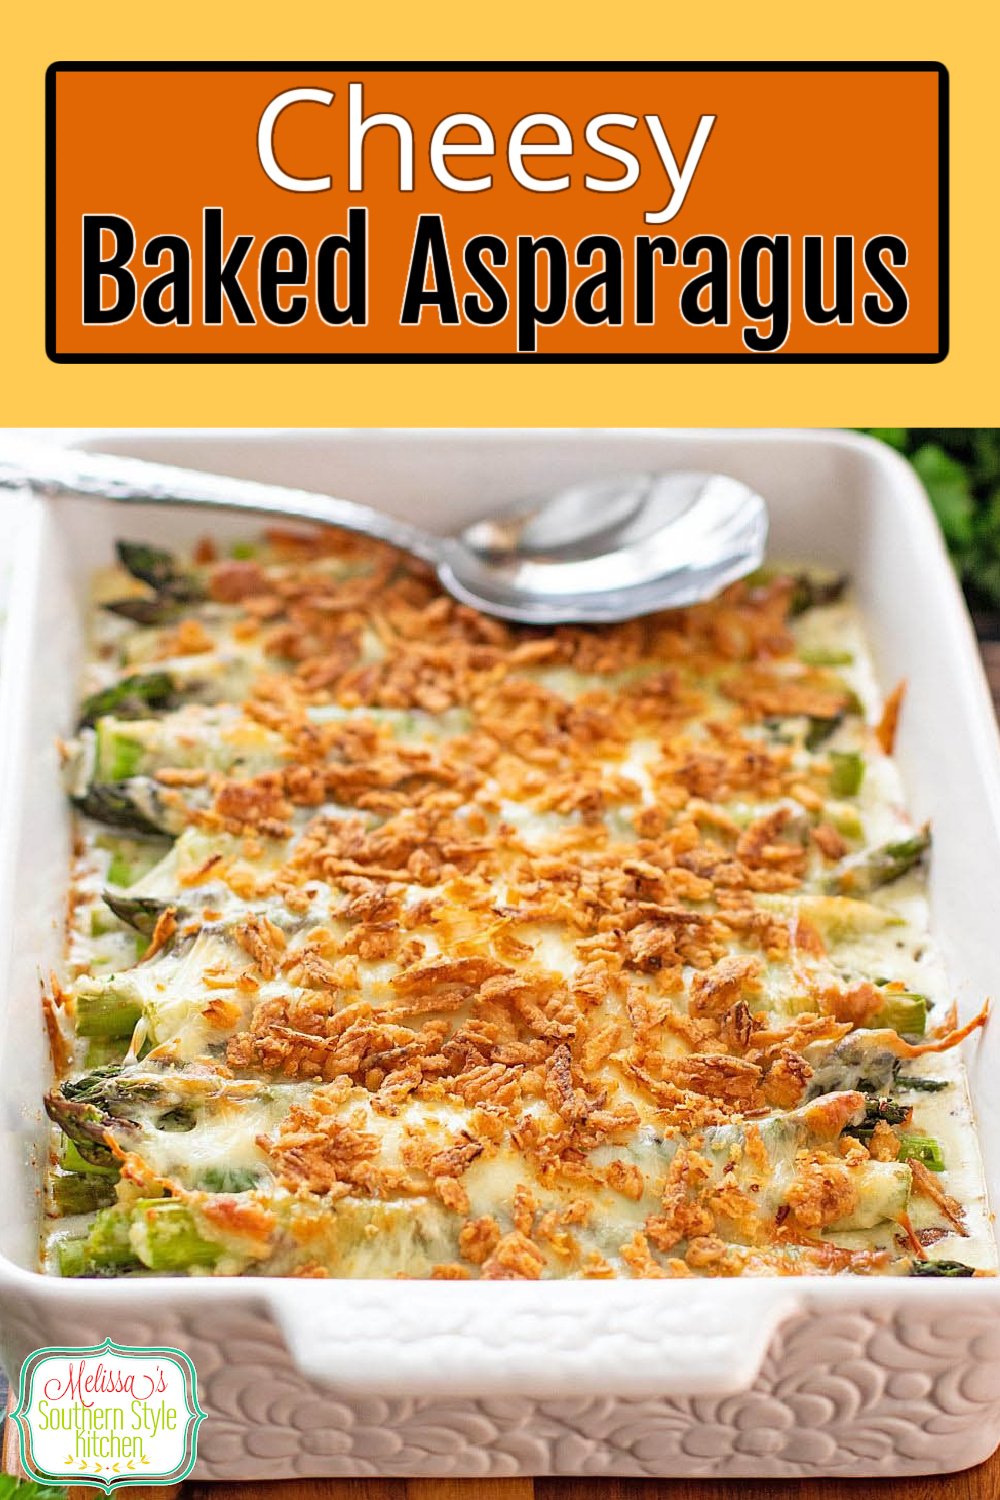 This oven roasted Cheesy Baked Asparagus is a decadent side dish that will elevate your side dish options #cheesybakedasparagus #asapragusrecipes #roastedasparagus #freshasparagusrecipes #southernrecipes via @melissasssk